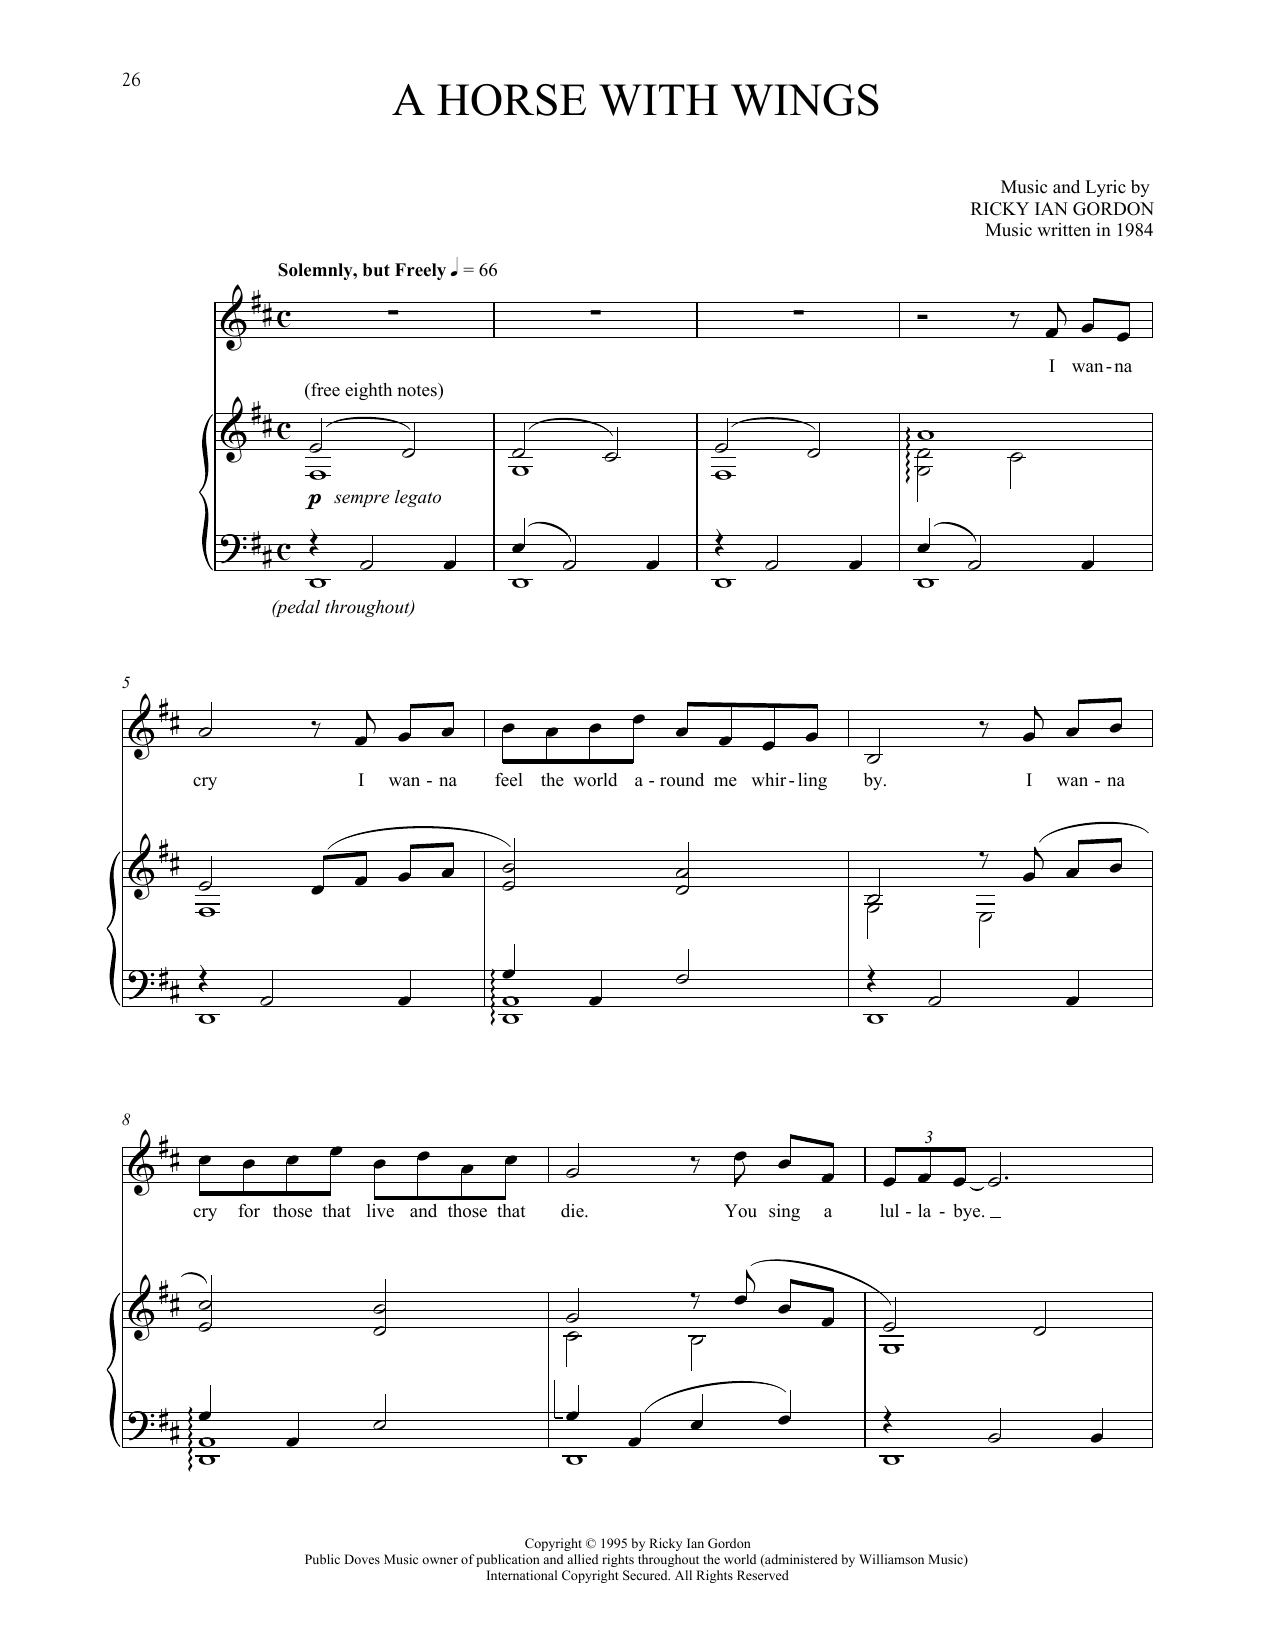 Download Ricky Ian Gordon A Horse With Wings Sheet Music